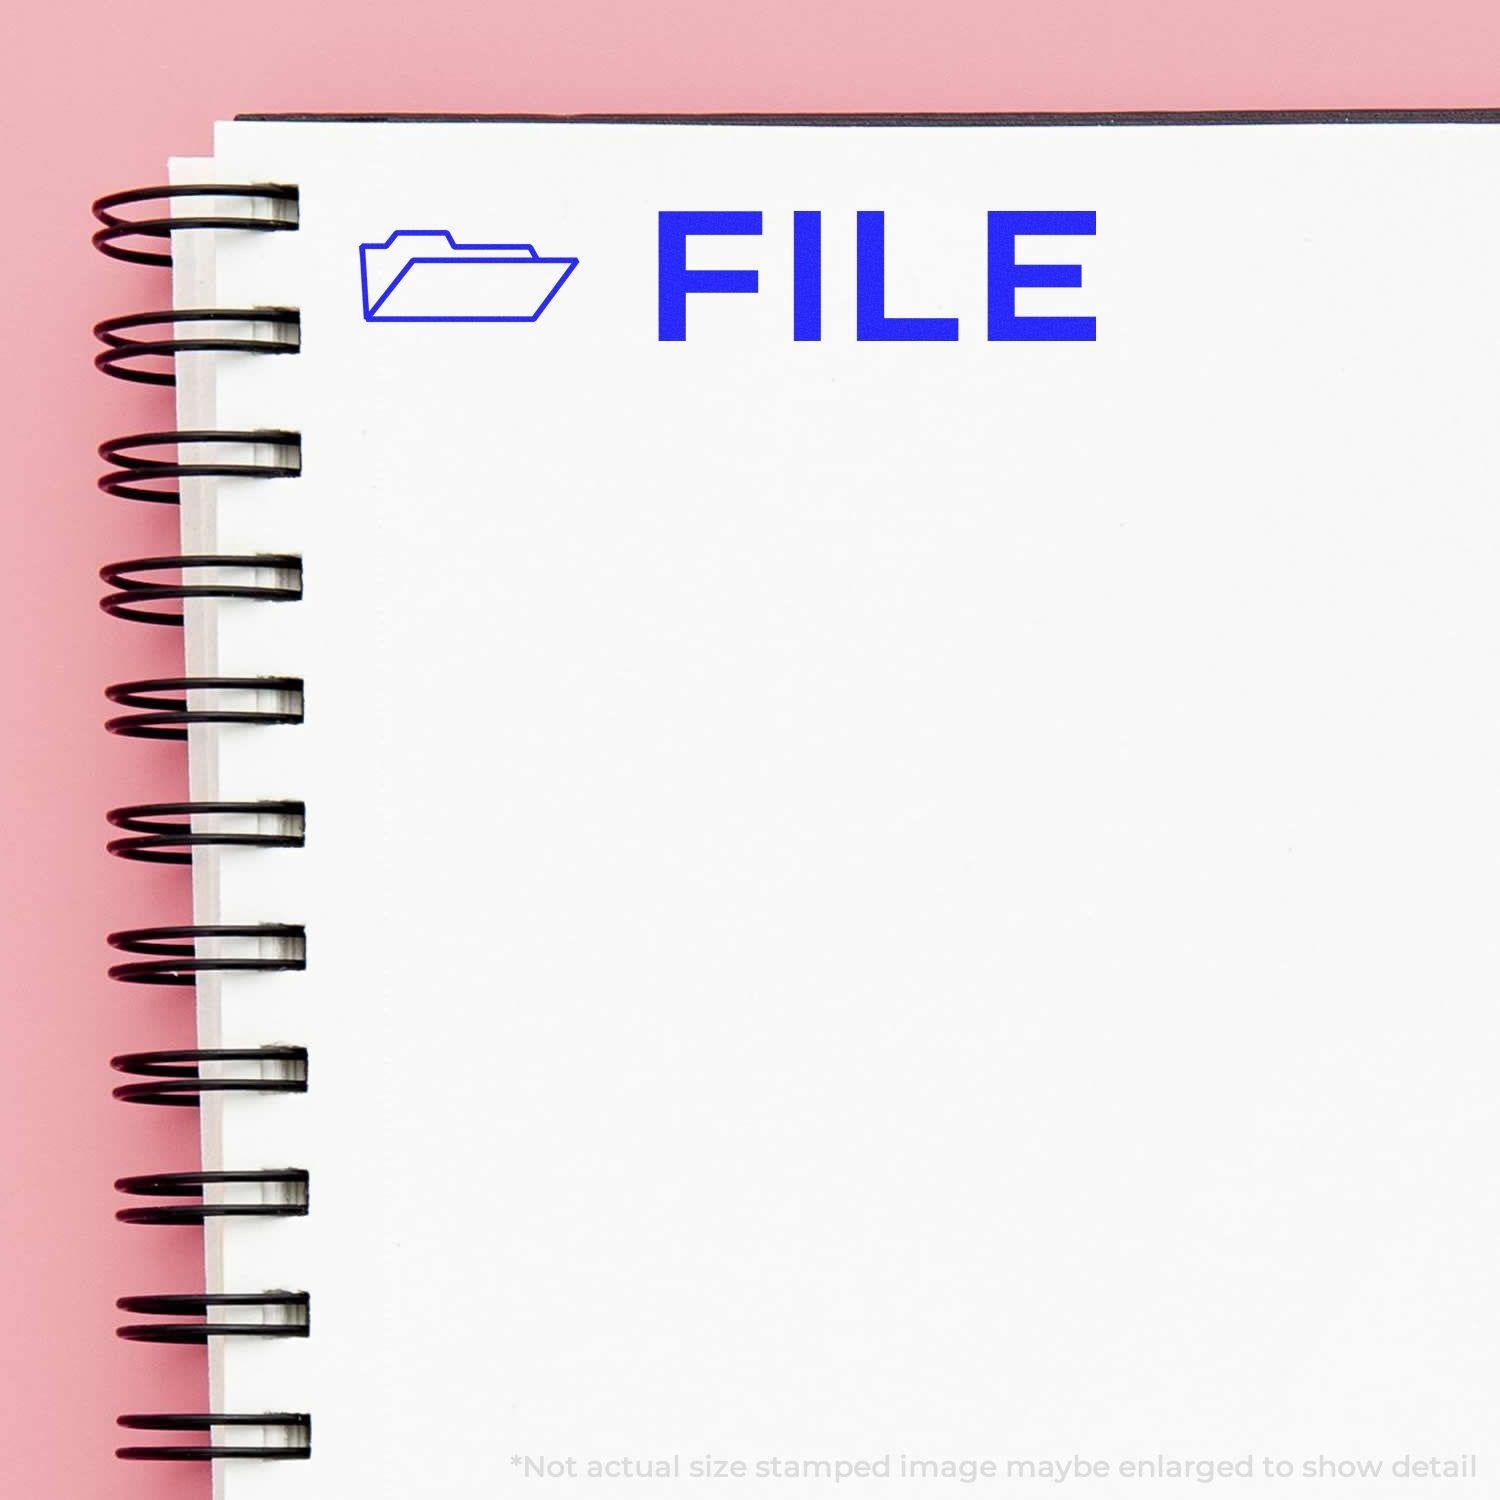 A stock office pre-inked stamp with a stamped image showing how the text "FILE" with an icon of a folder on the left side is displayed after stamping.